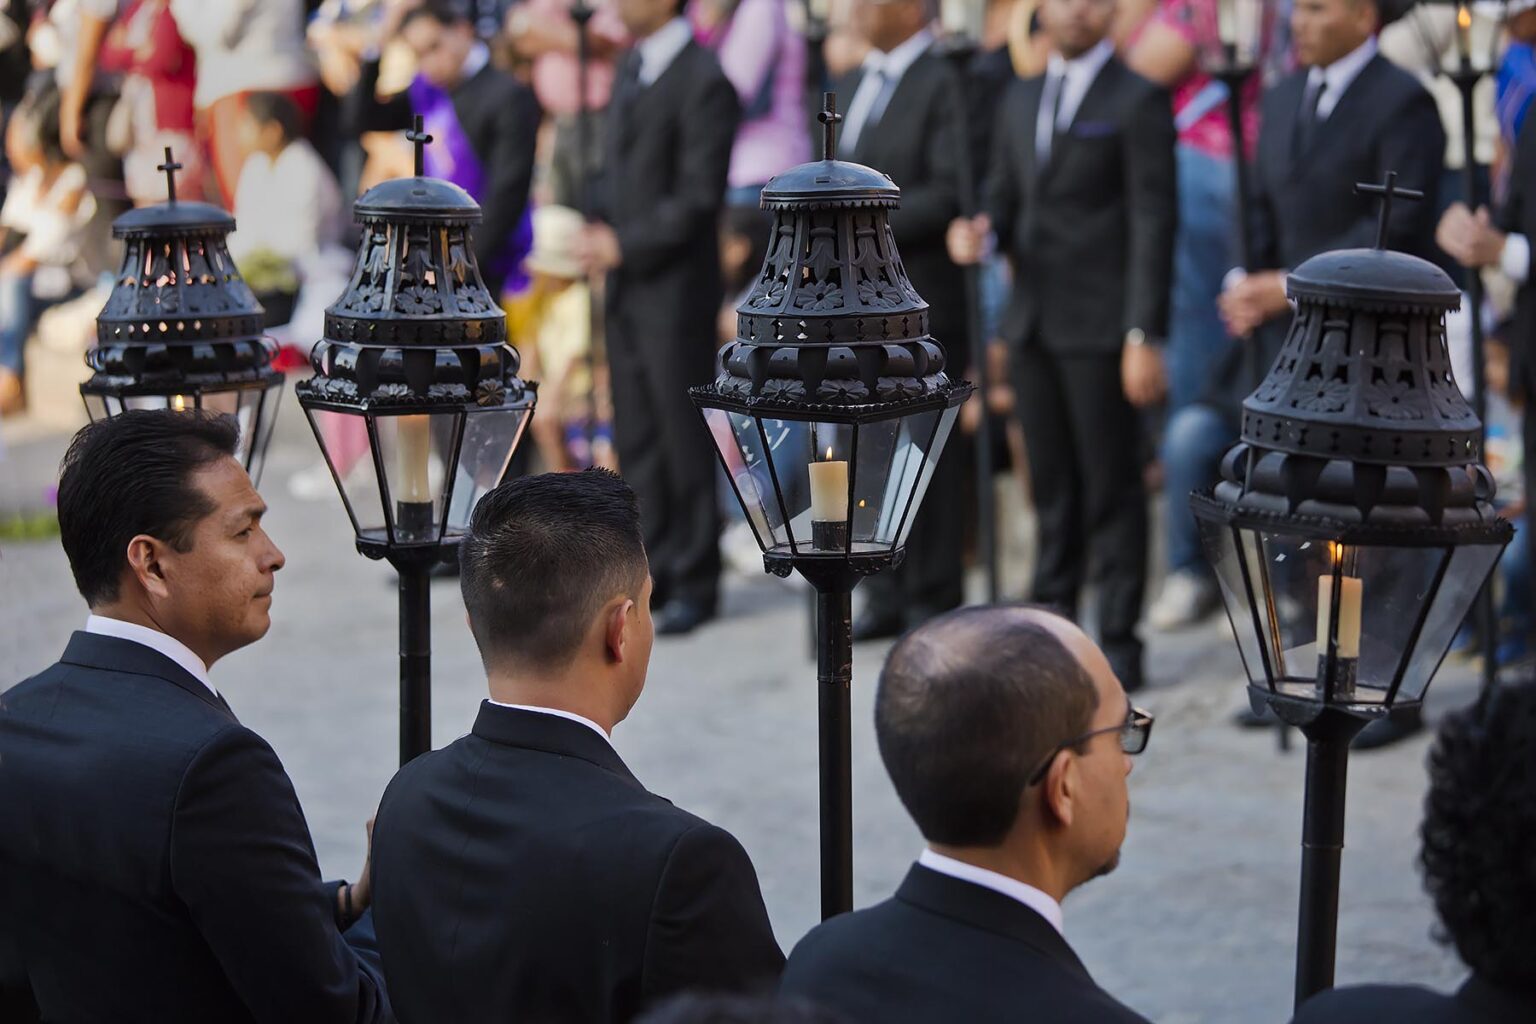 Mexican men carry candle lanterns in the Good Friday Procession, known as the Santo Entierro, from the ORATORIO CHURCH - SAN MIGUEL DE ALLENDE, MEXICO